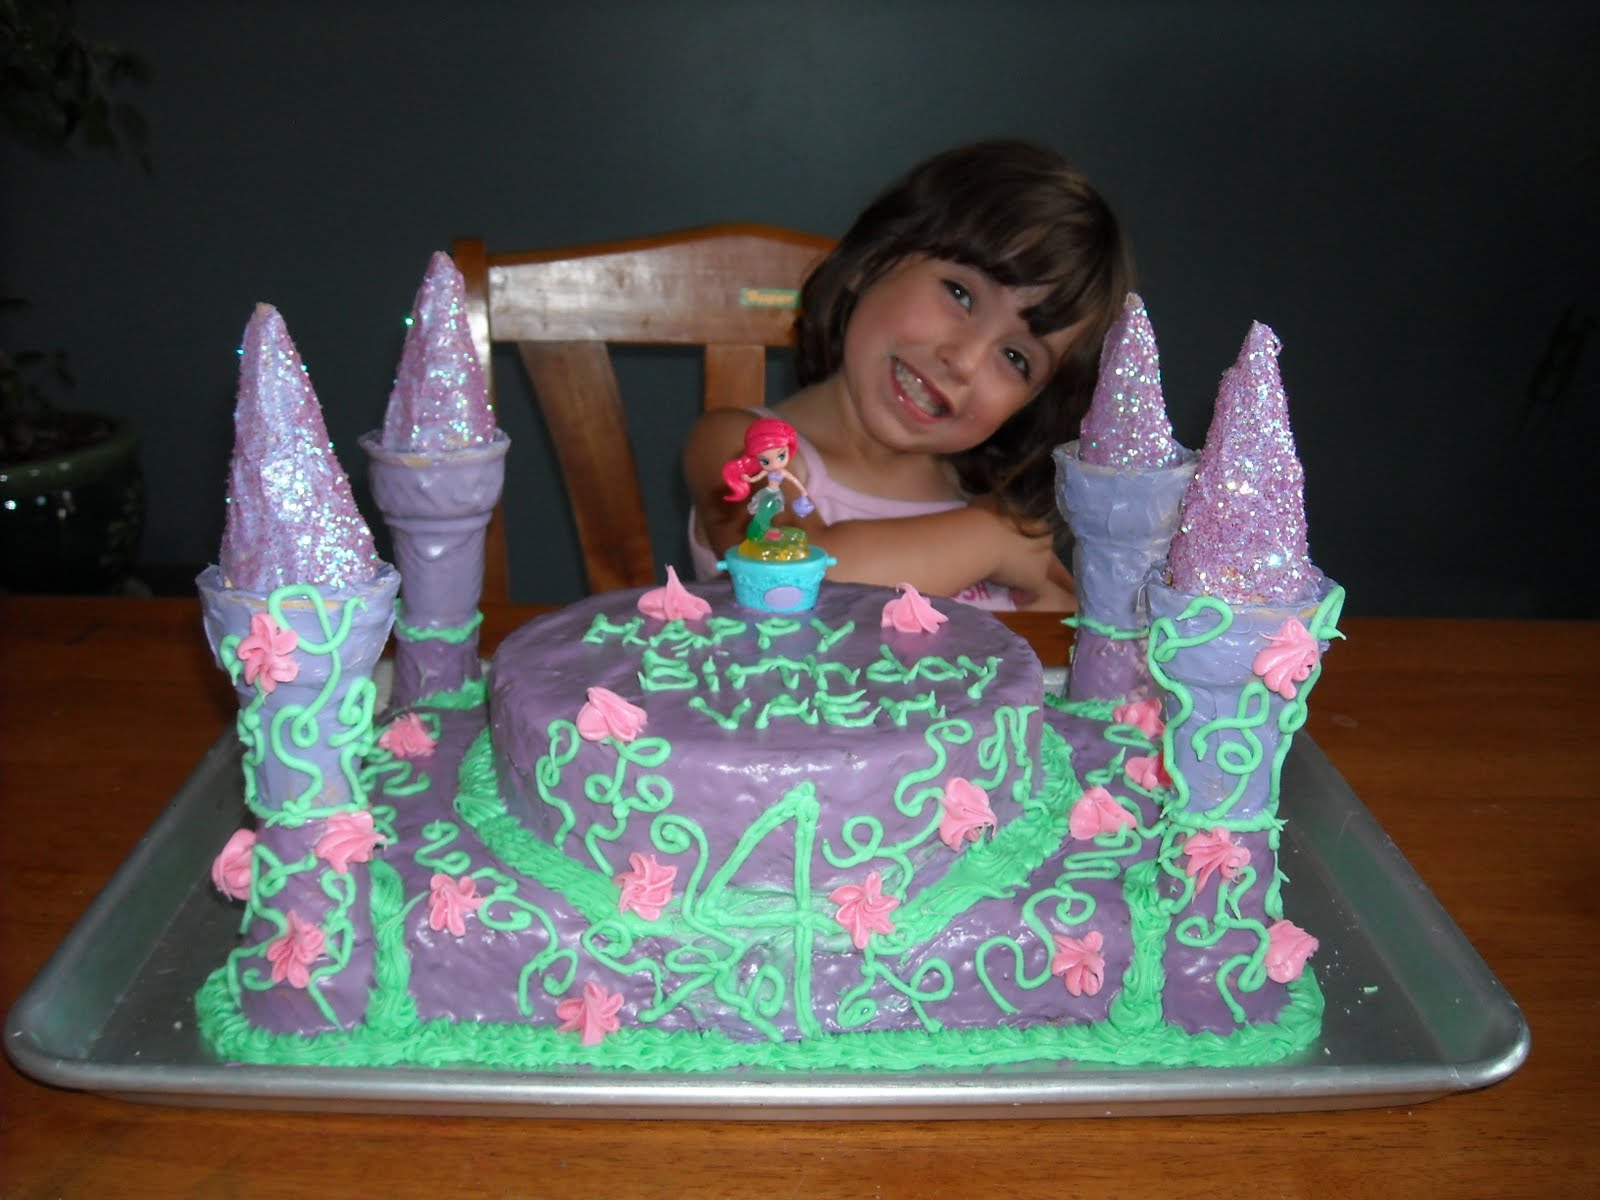 Frugal & Fun: Make Your Own Birthday Cakes